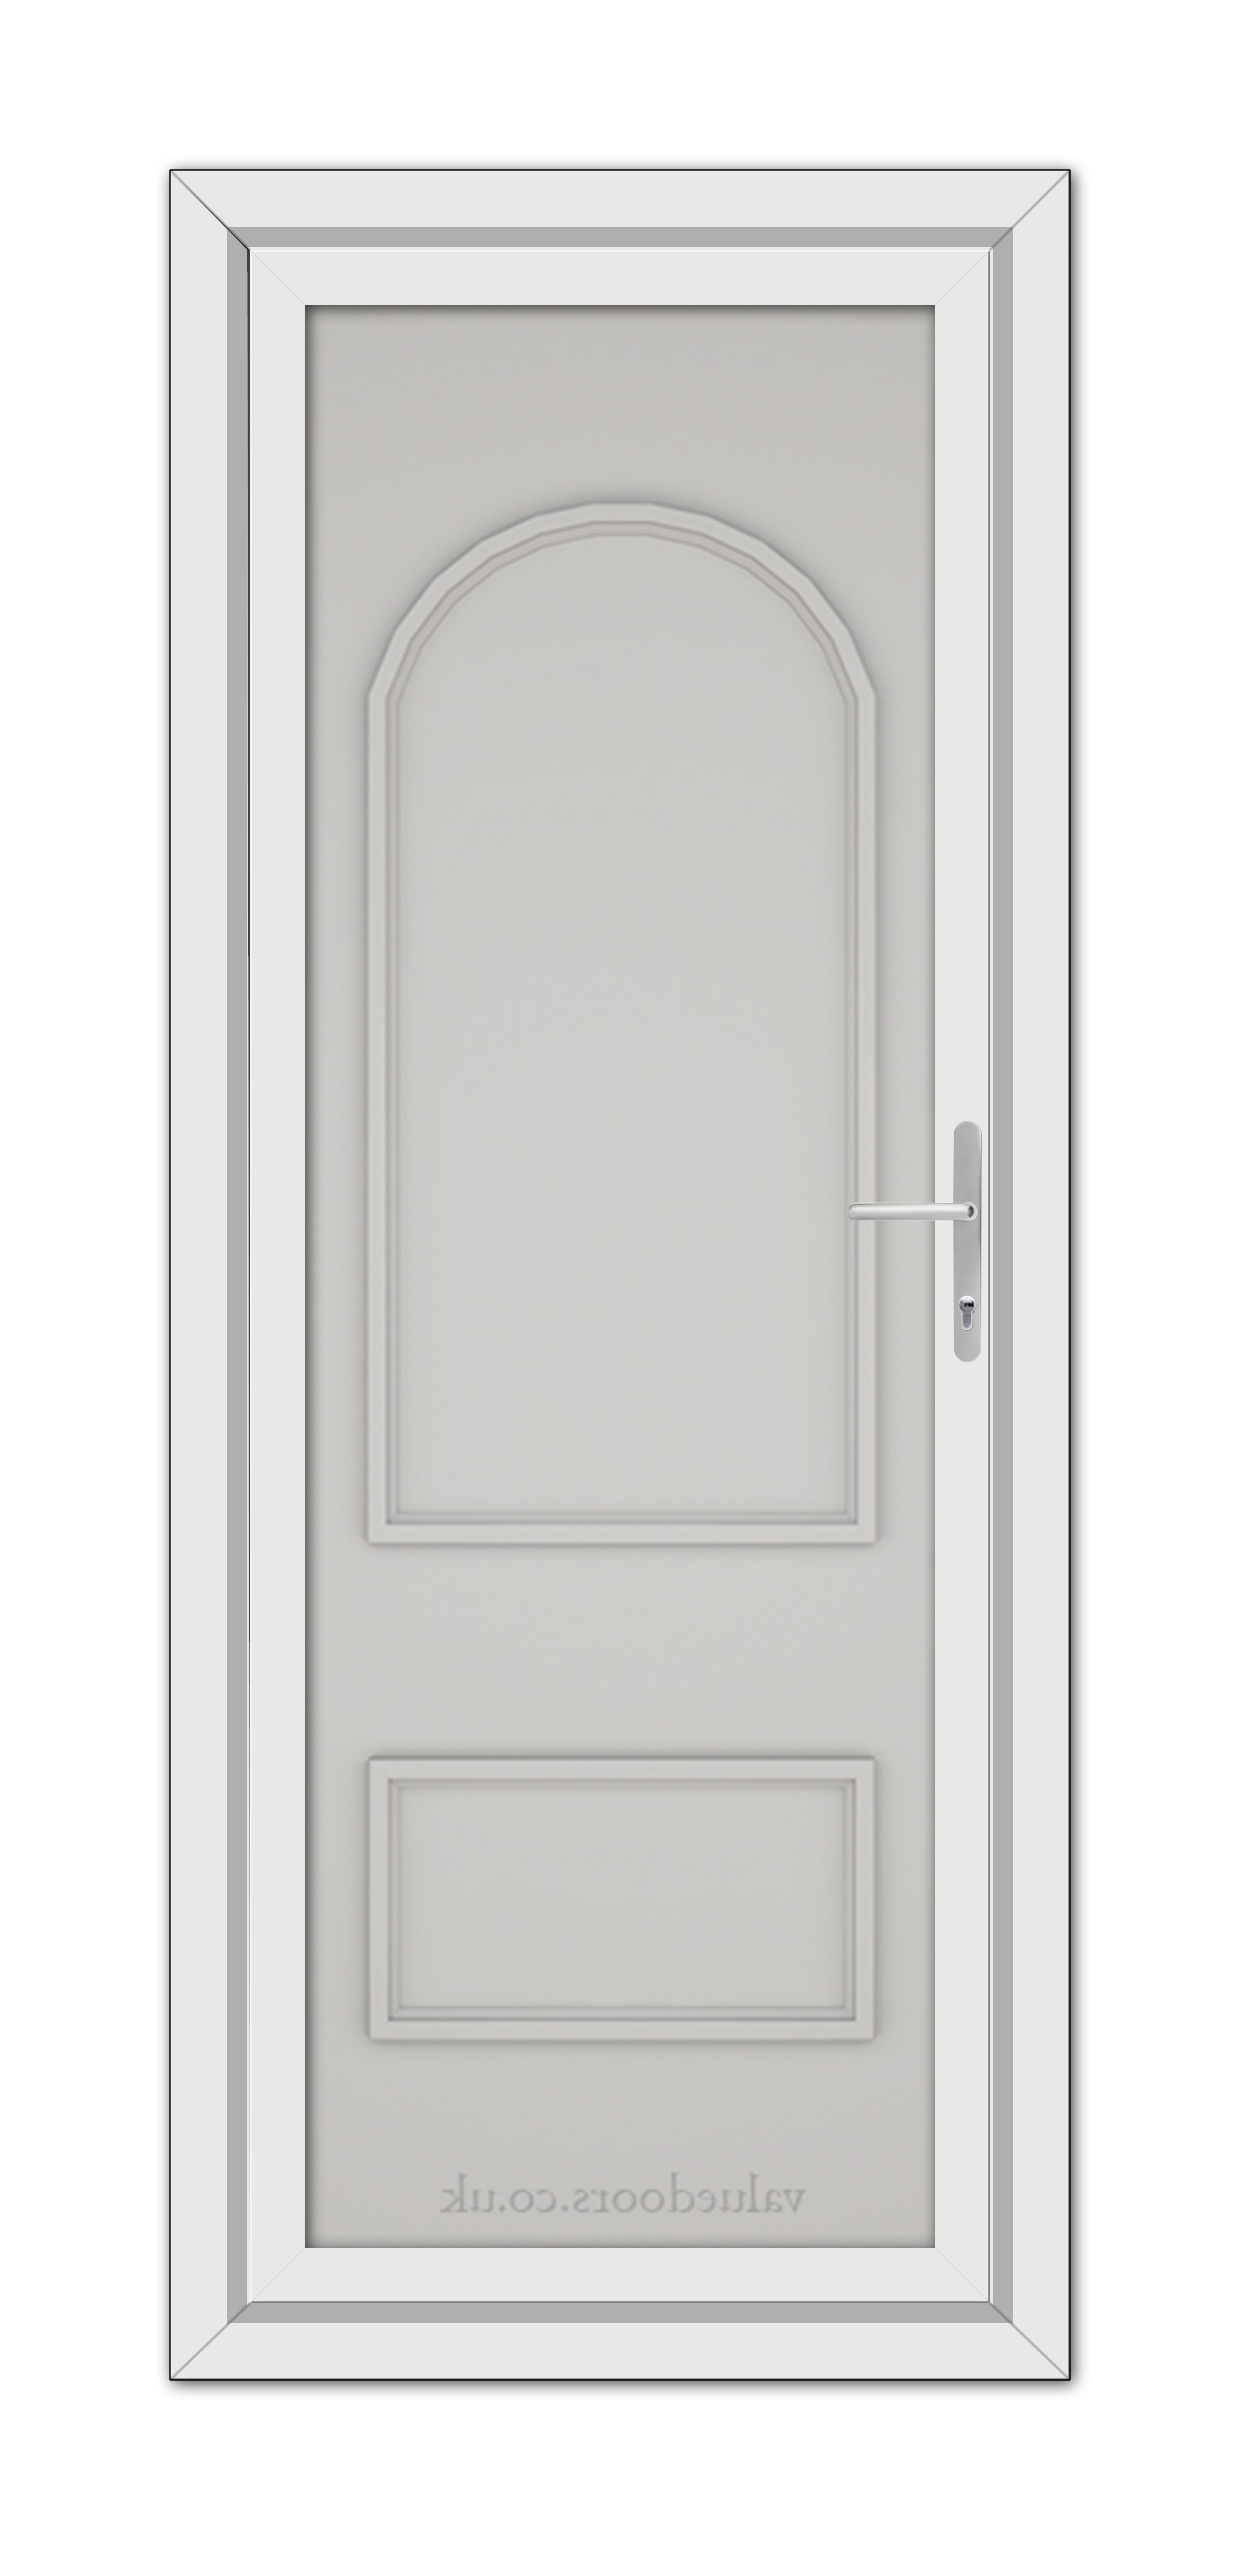 A white Silver Grey Rockingham Solid uPVC door with a silver handle.